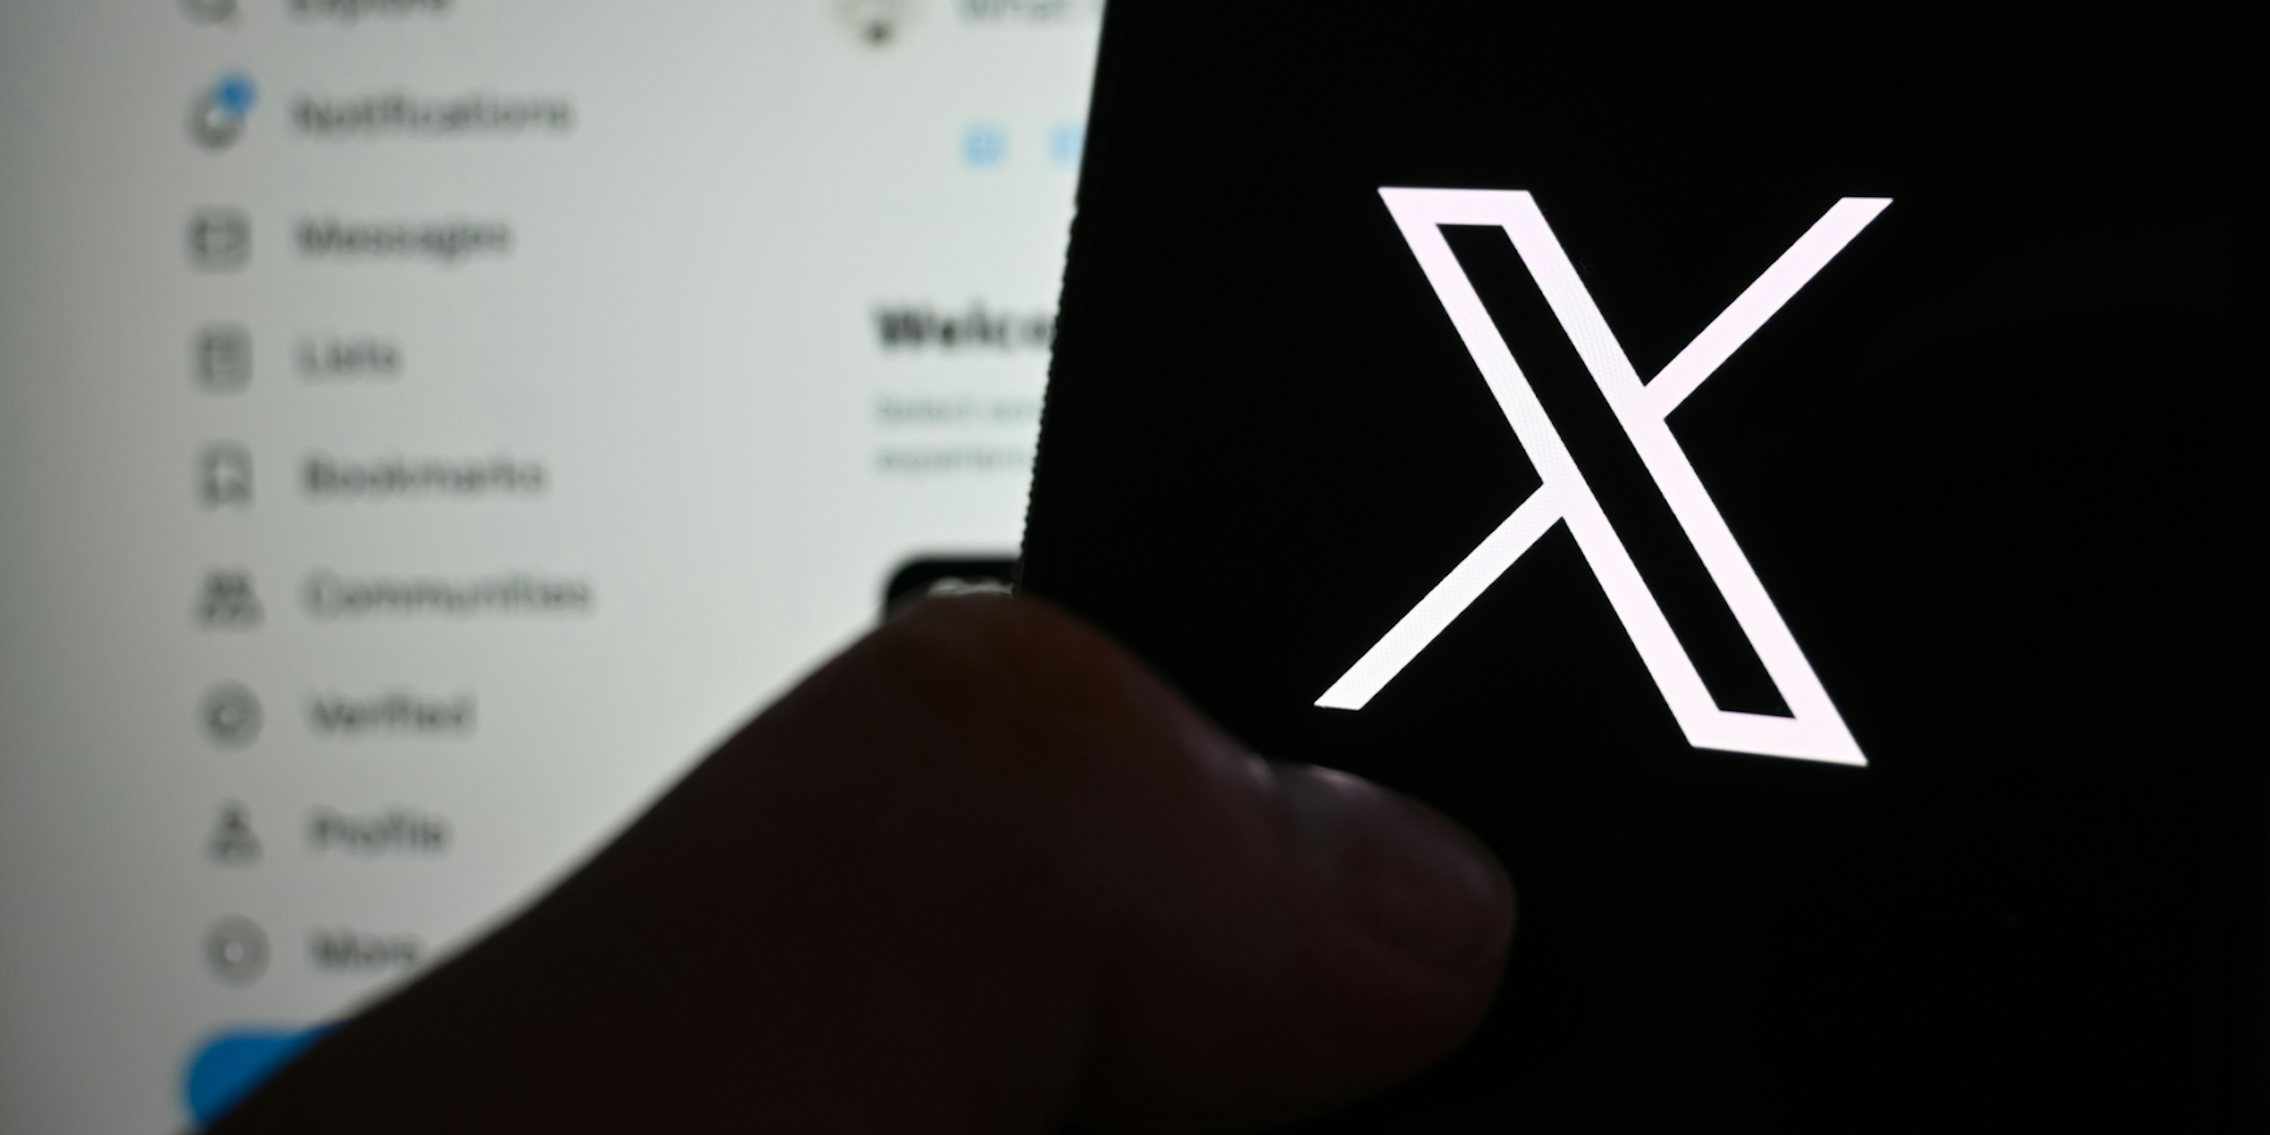 hand holding phone with X logo on screen in front of X open on computer